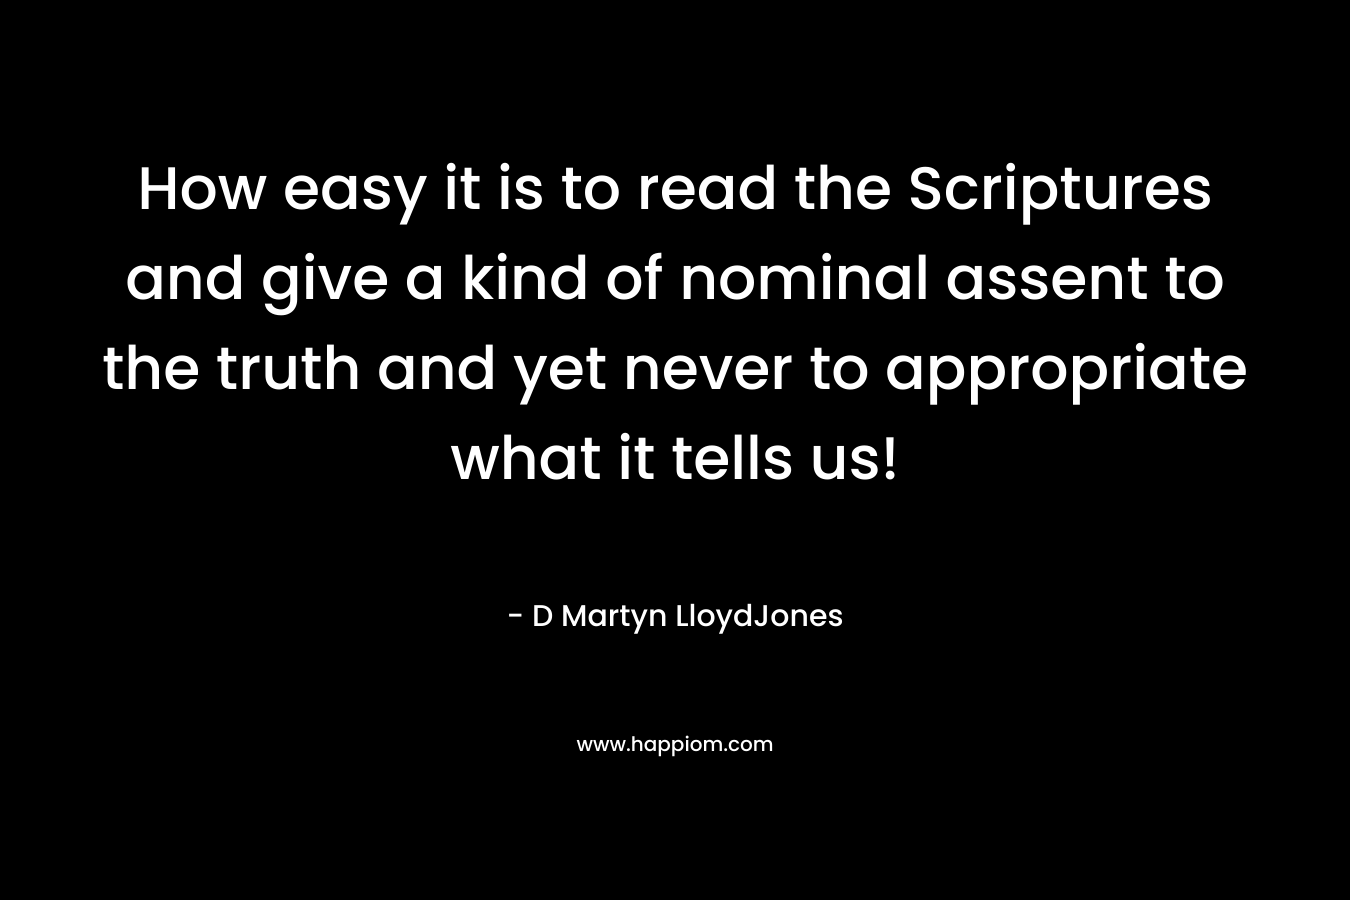 How easy it is to read the Scriptures and give a kind of nominal assent to the truth and yet never to appropriate what it tells us! – D Martyn LloydJones